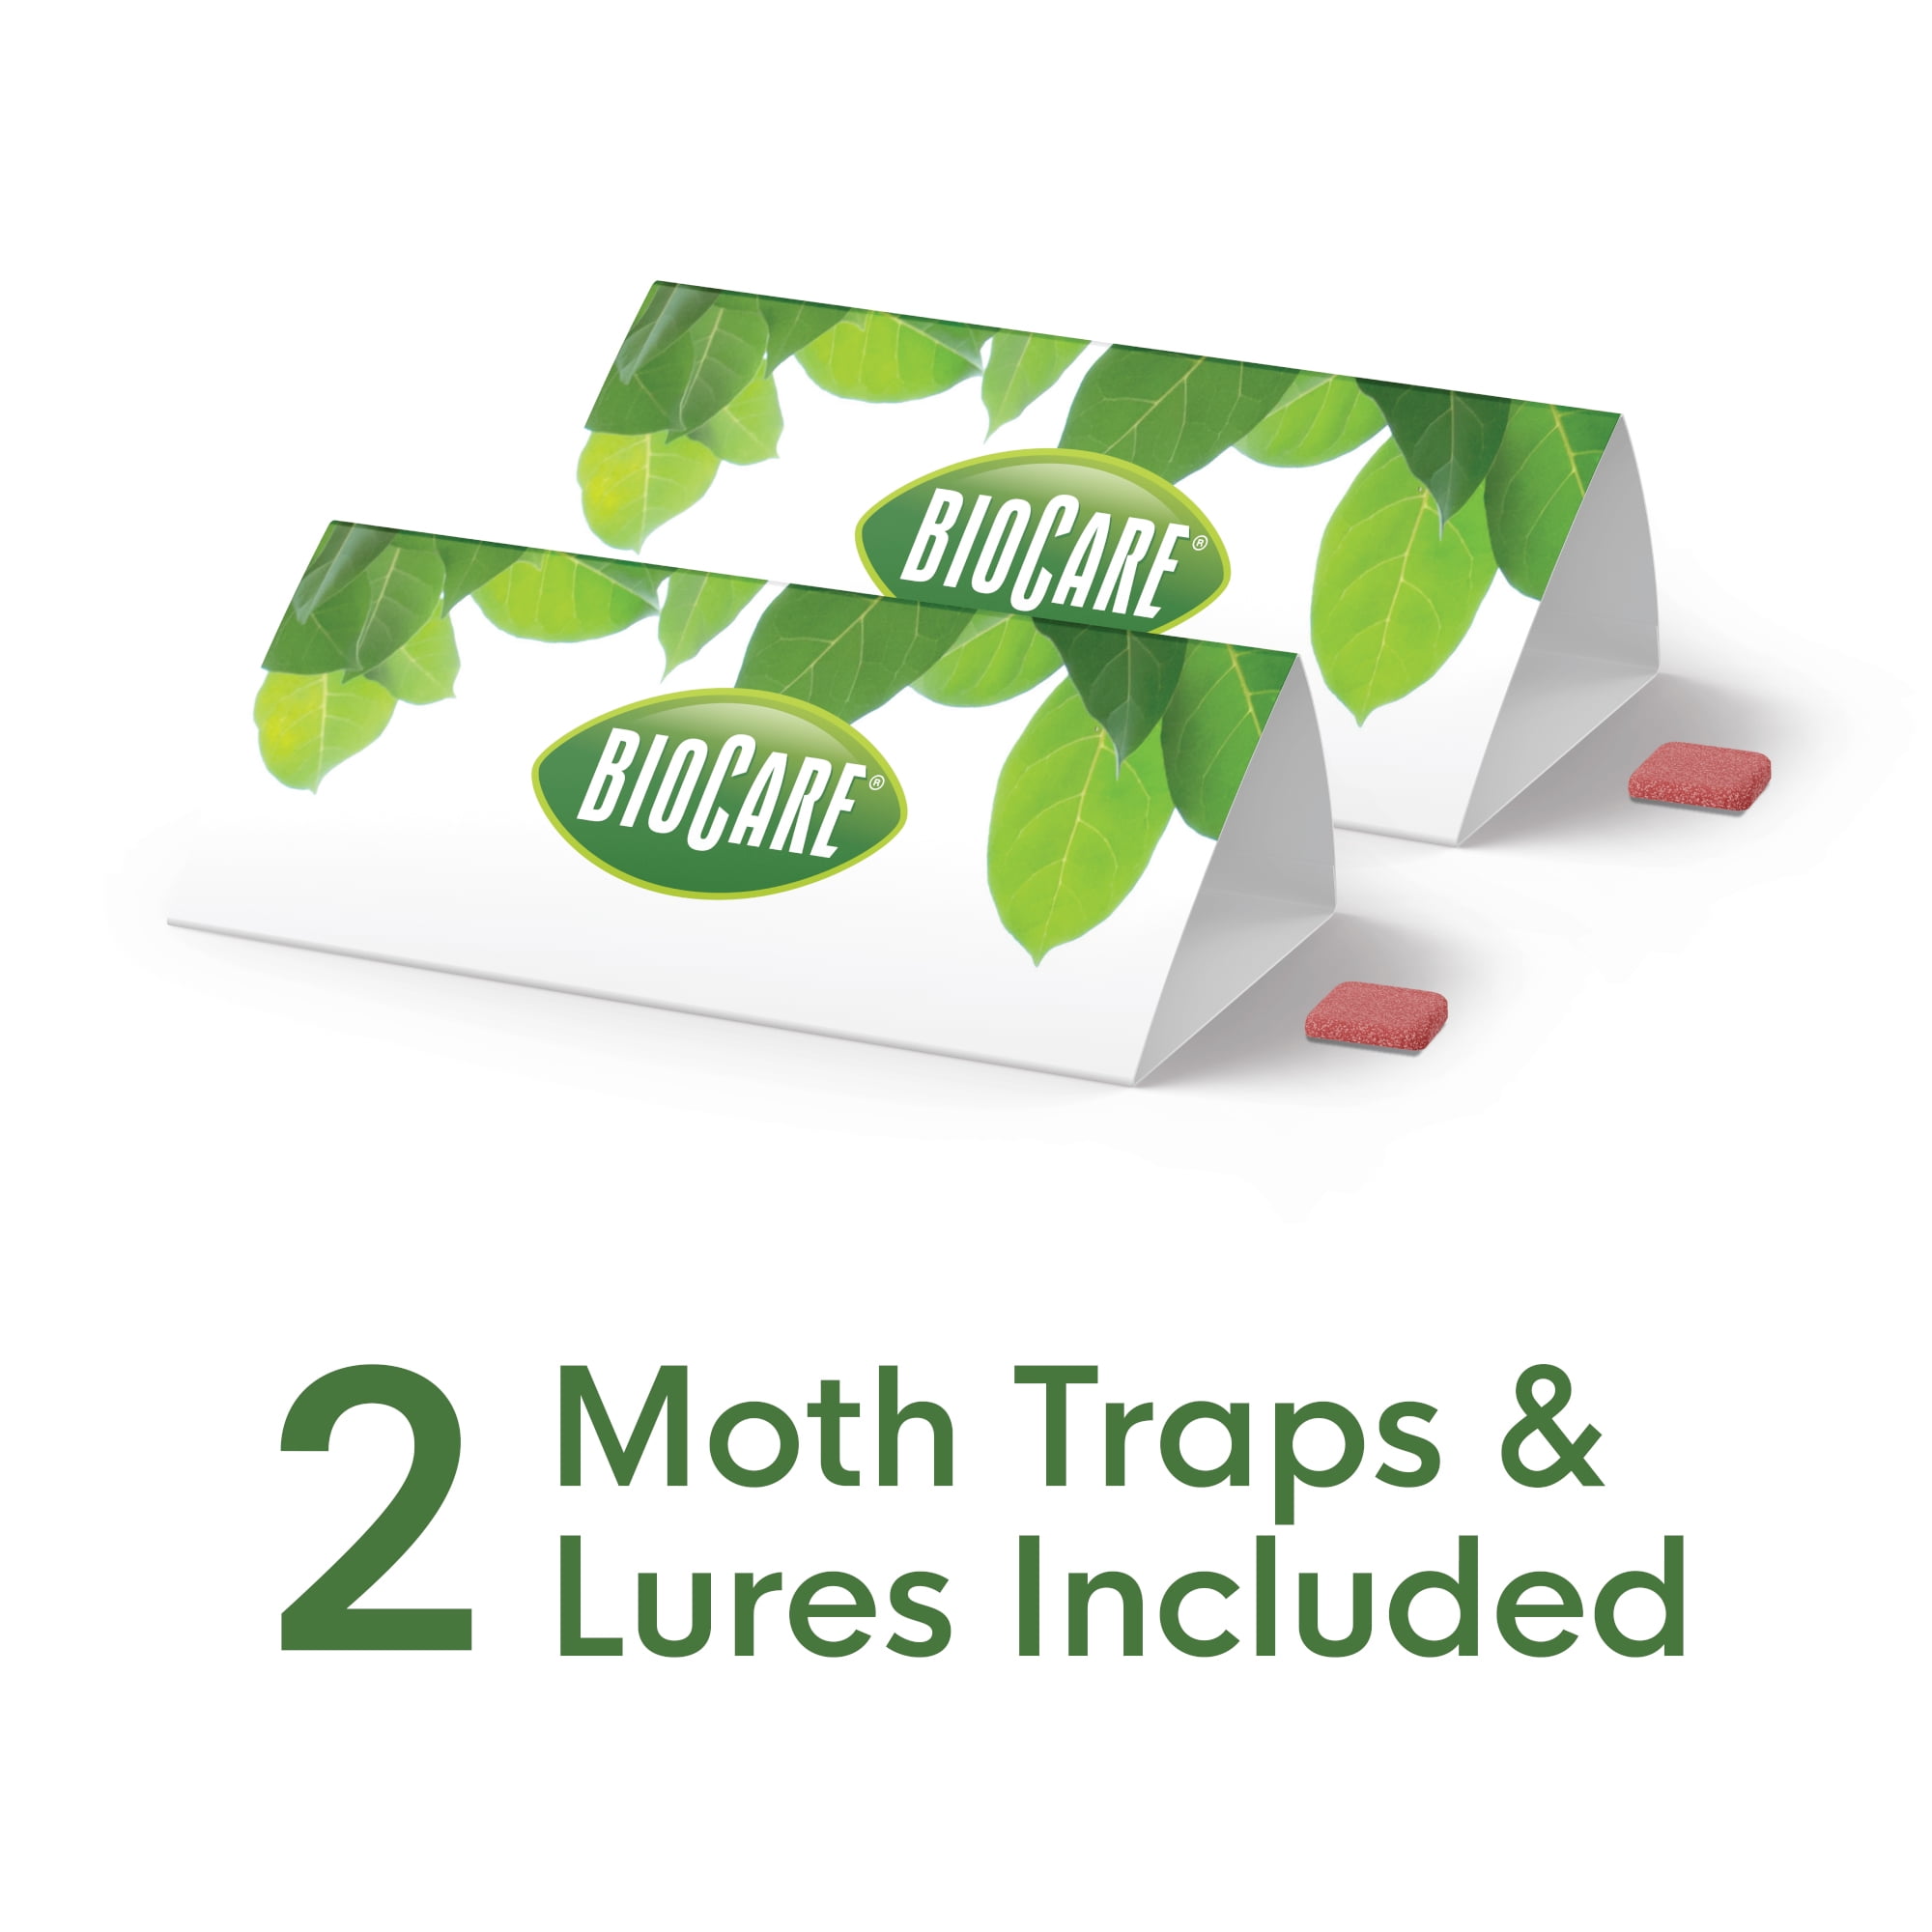 Green Protect Clothes Moth Trap (Pack Of 2) (pest Control)